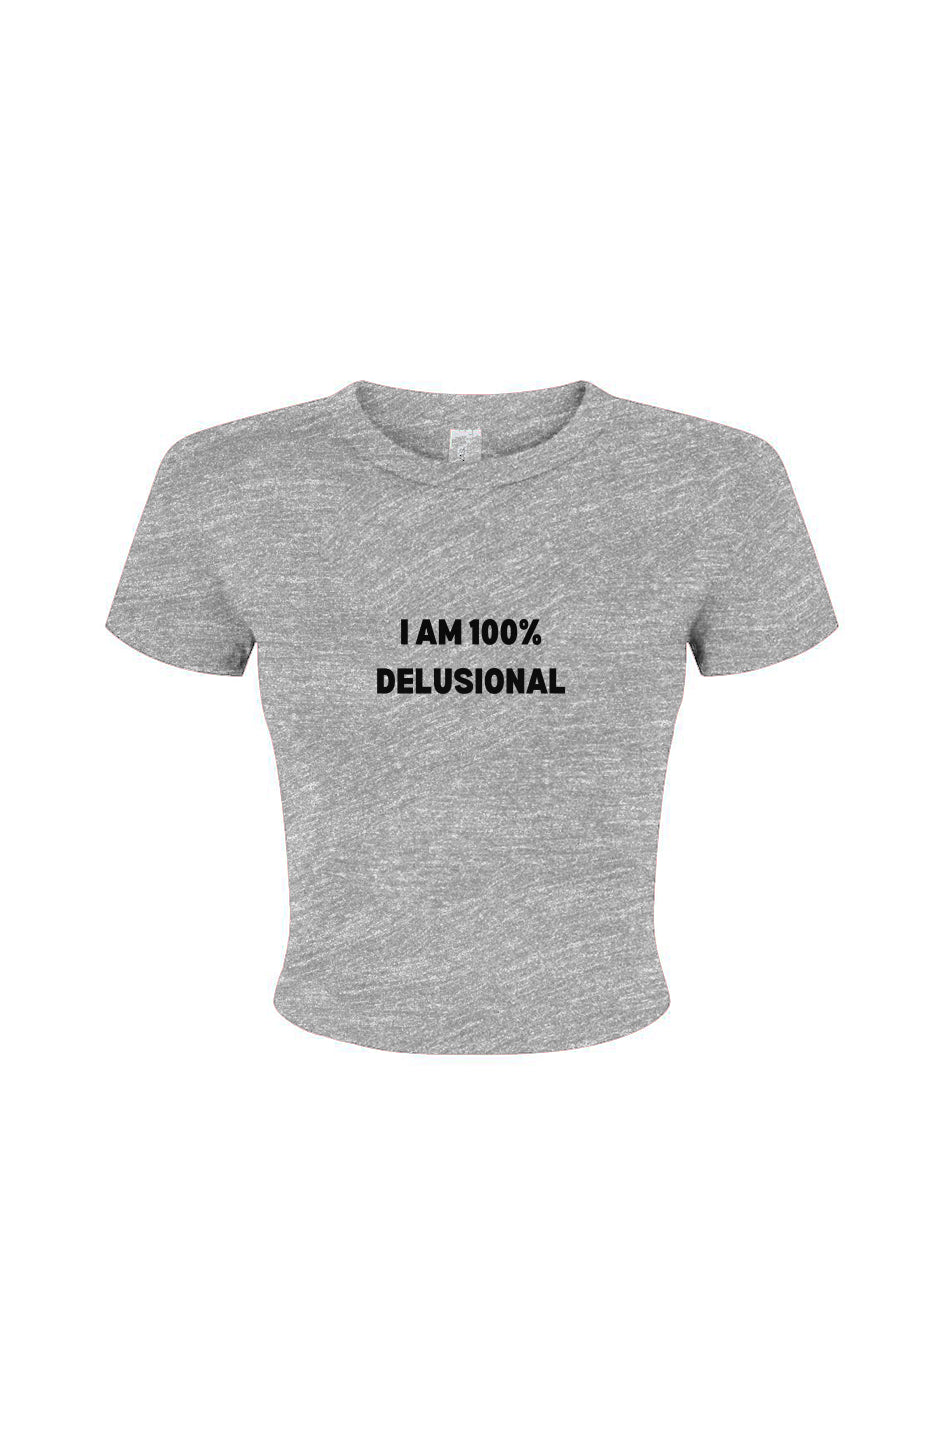 "I am 100% Delusional" - Baby tee